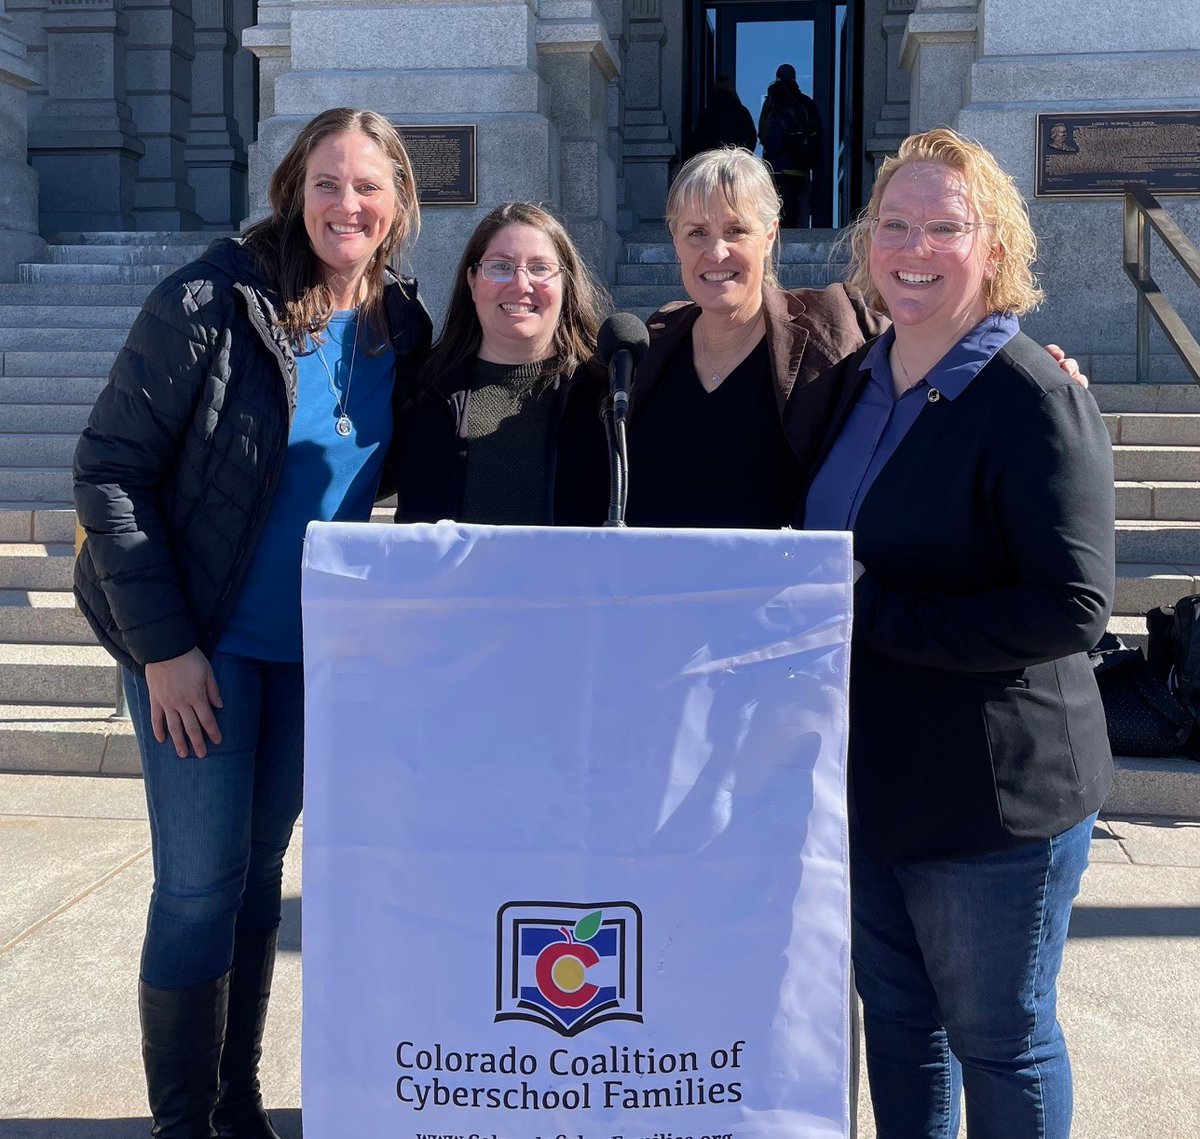 Last week our Board President Letrisha Weber was in Colorado for @CO_CyberFams Capitol Day. A big shout out to the team there for hosting a fantastic event! #ITrustParents #SchoolChoice #OnlineLearning